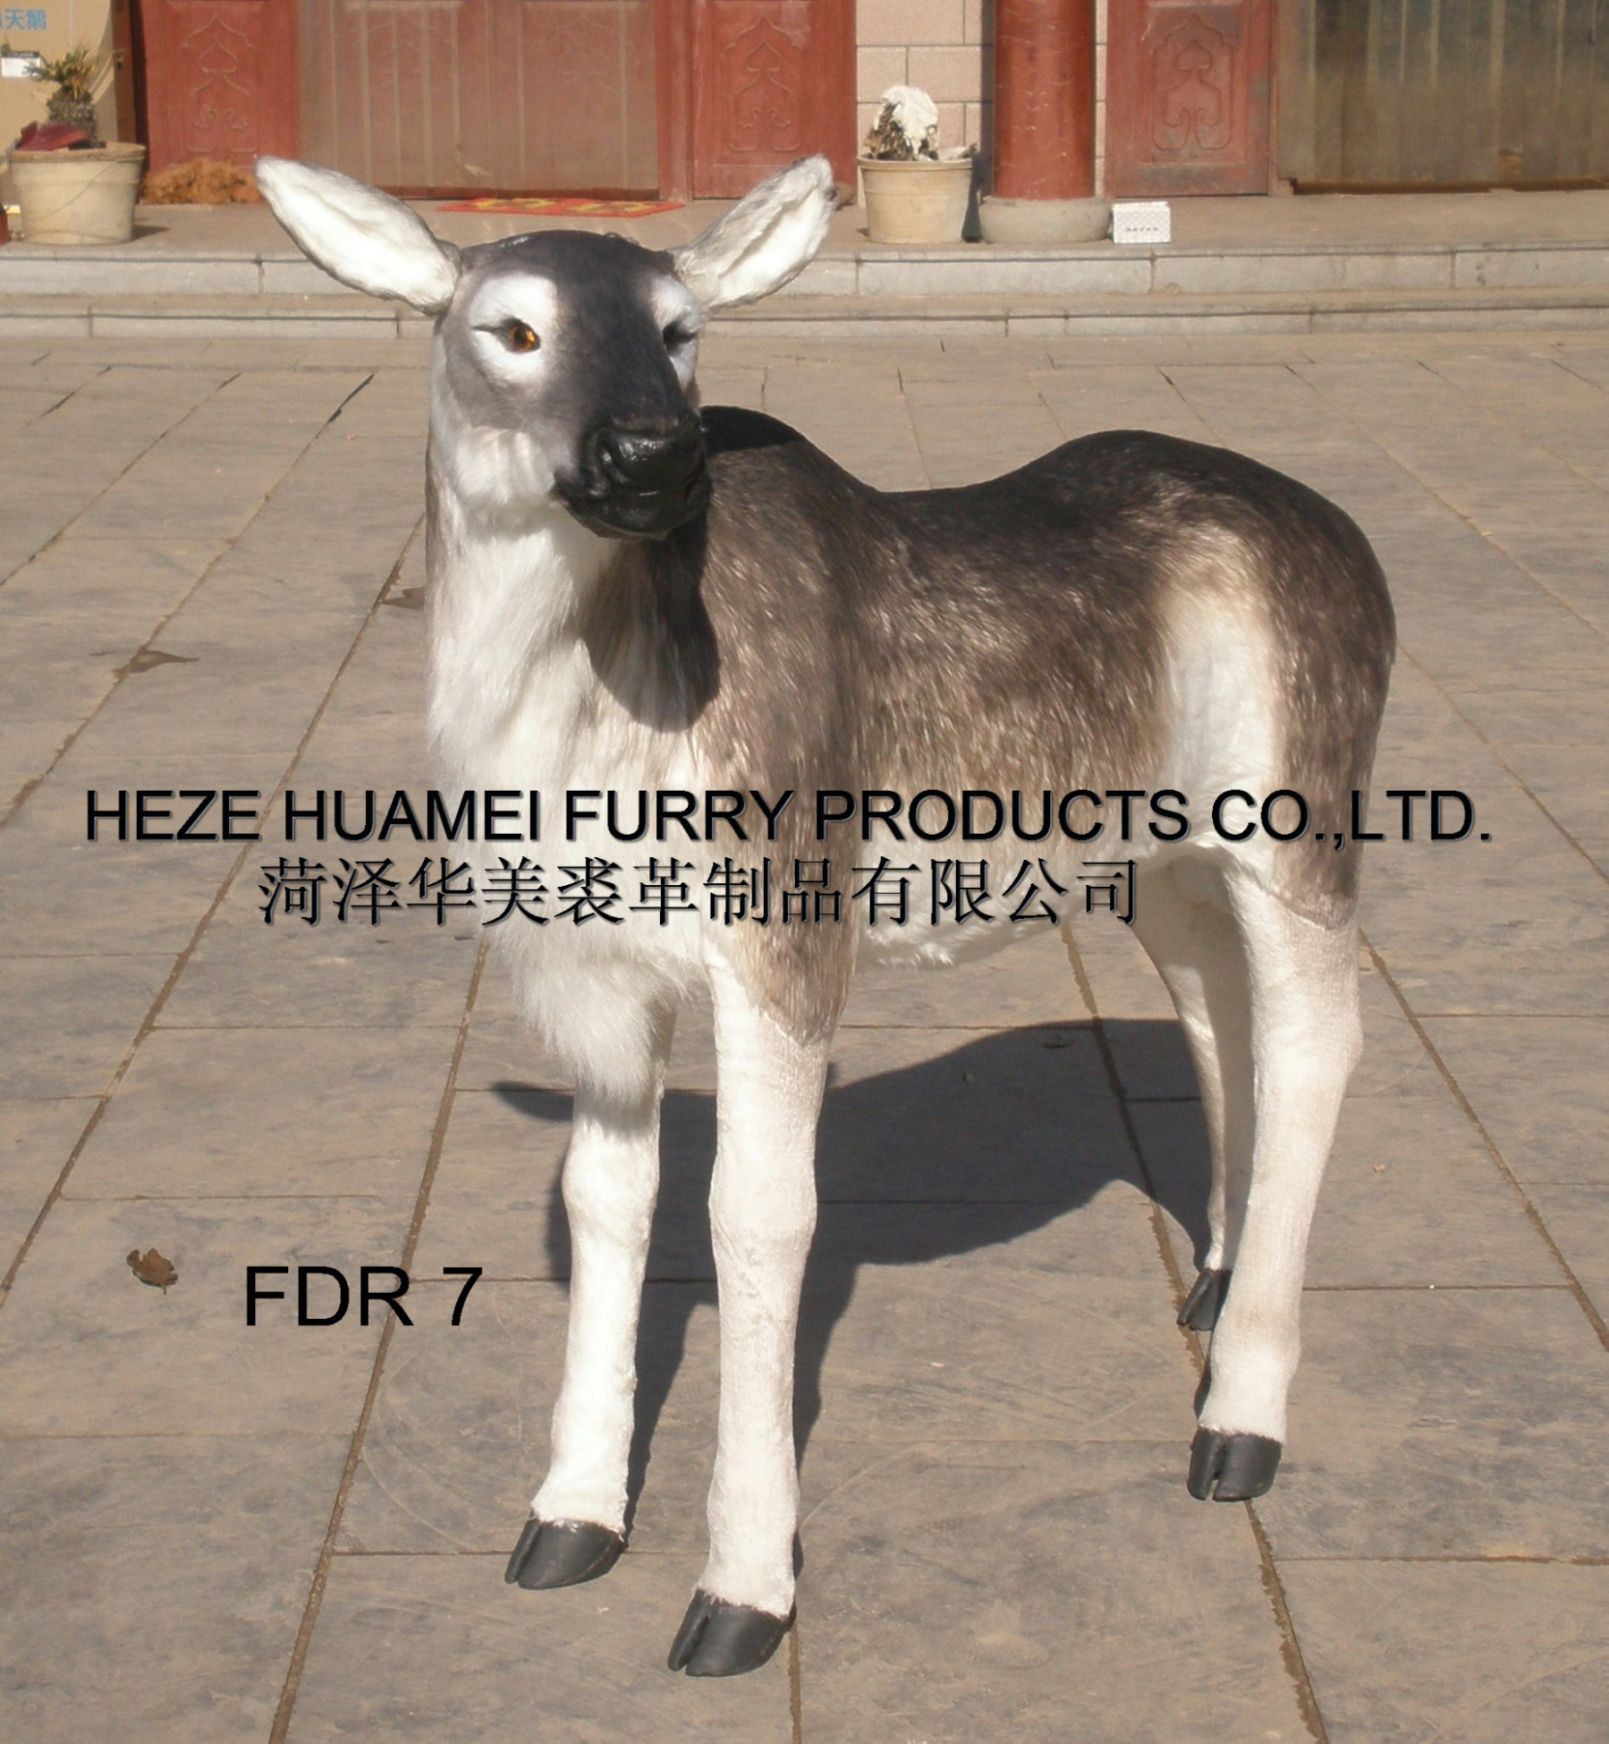 FDR 7,HEZE YUHANG FURRY PRODUCTS CO., LTD.